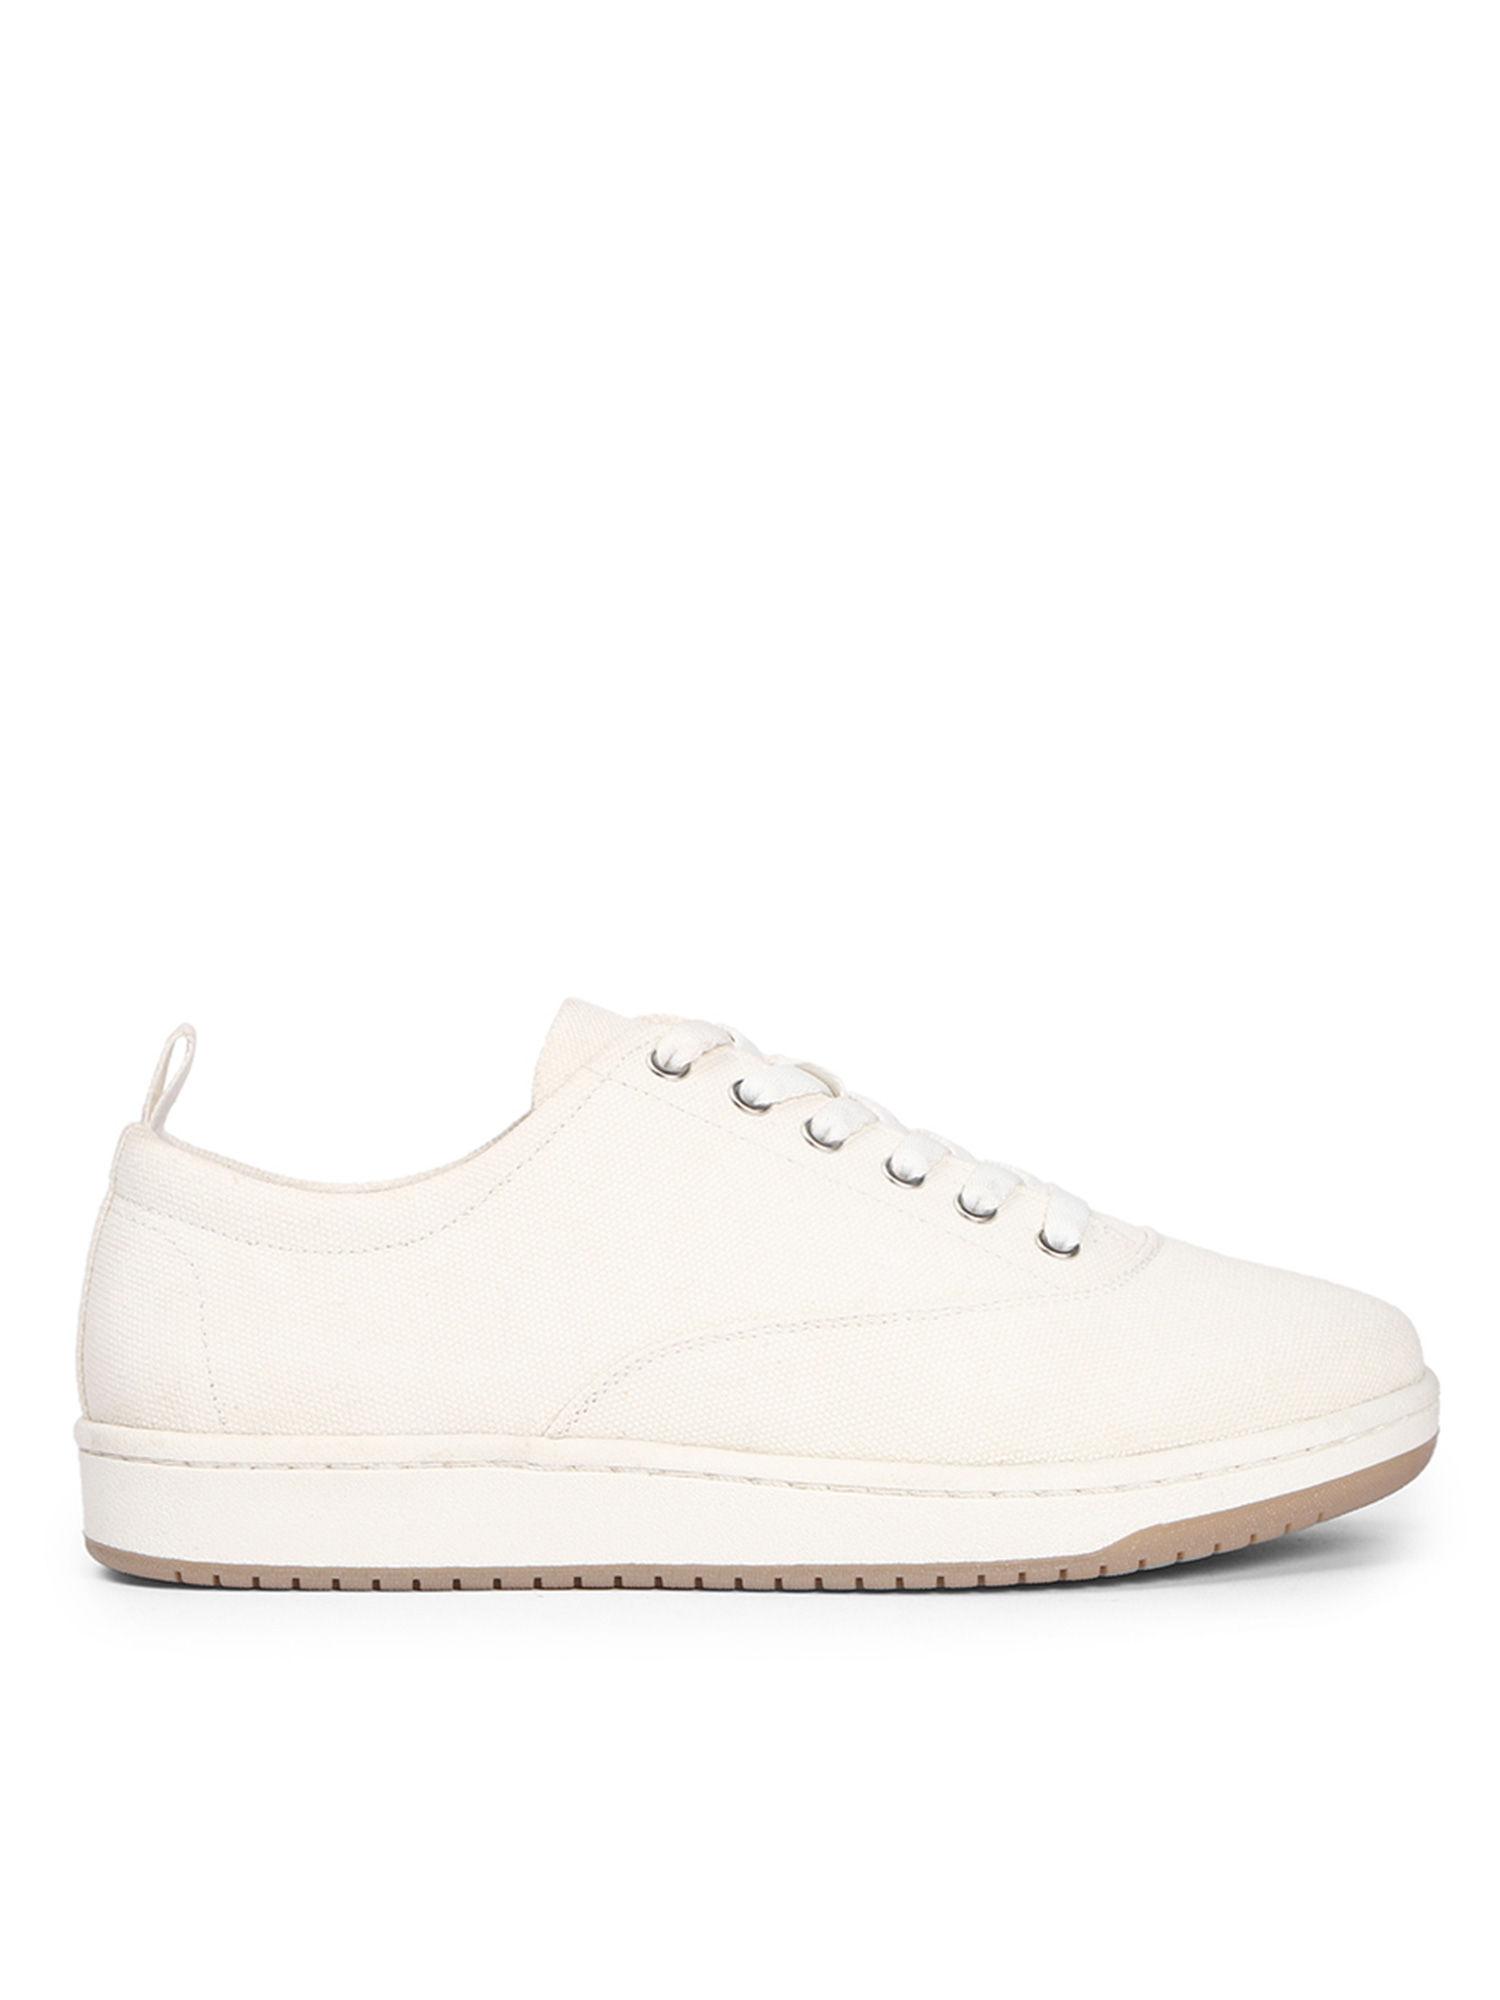 white-solid-casual-sneaker